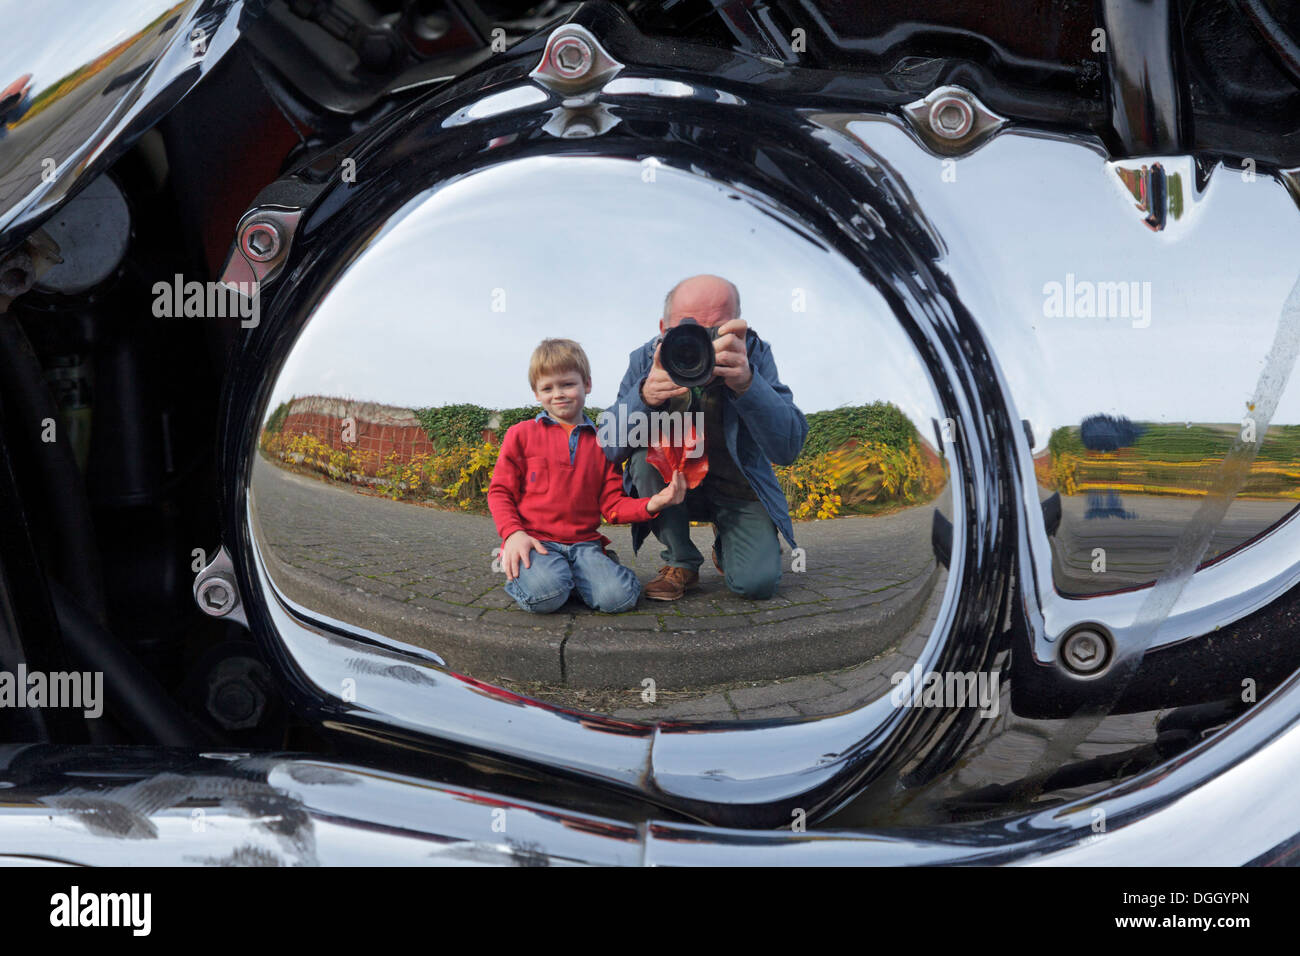 mirror image of a boy and a man, motorcycle Stock Photo